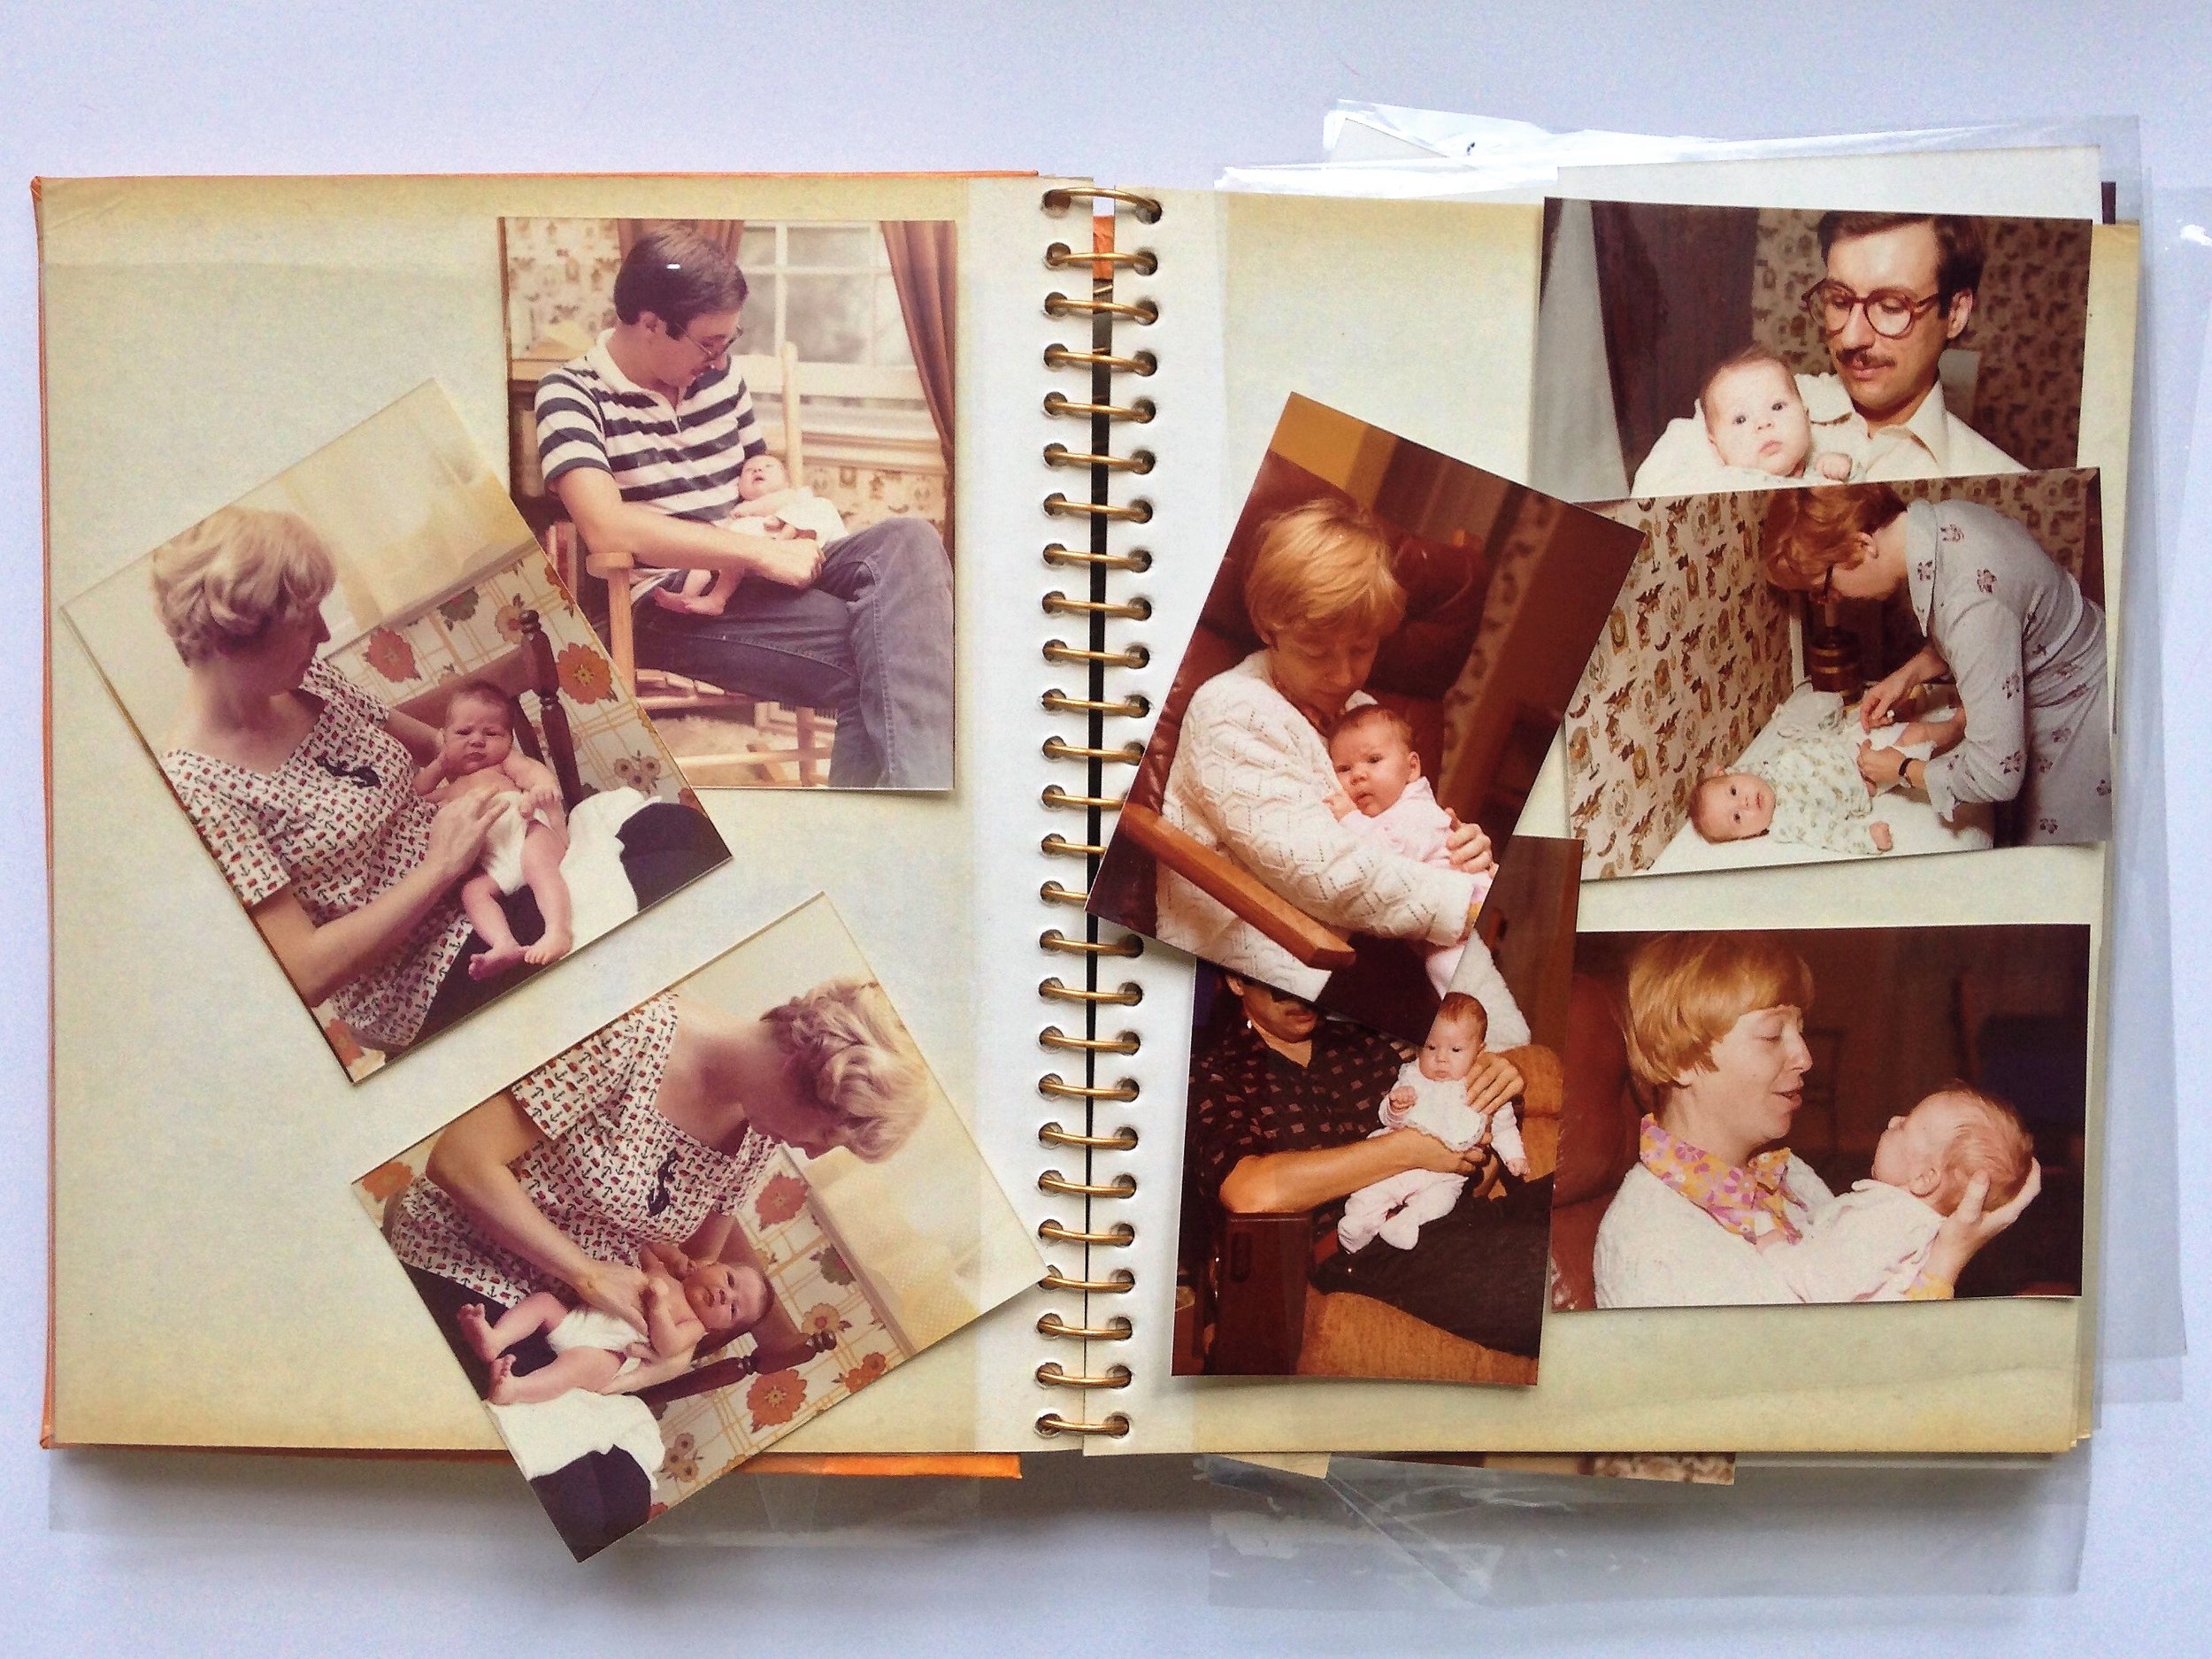 Stop Damaging Your Family Photos and Learn to Protect Them